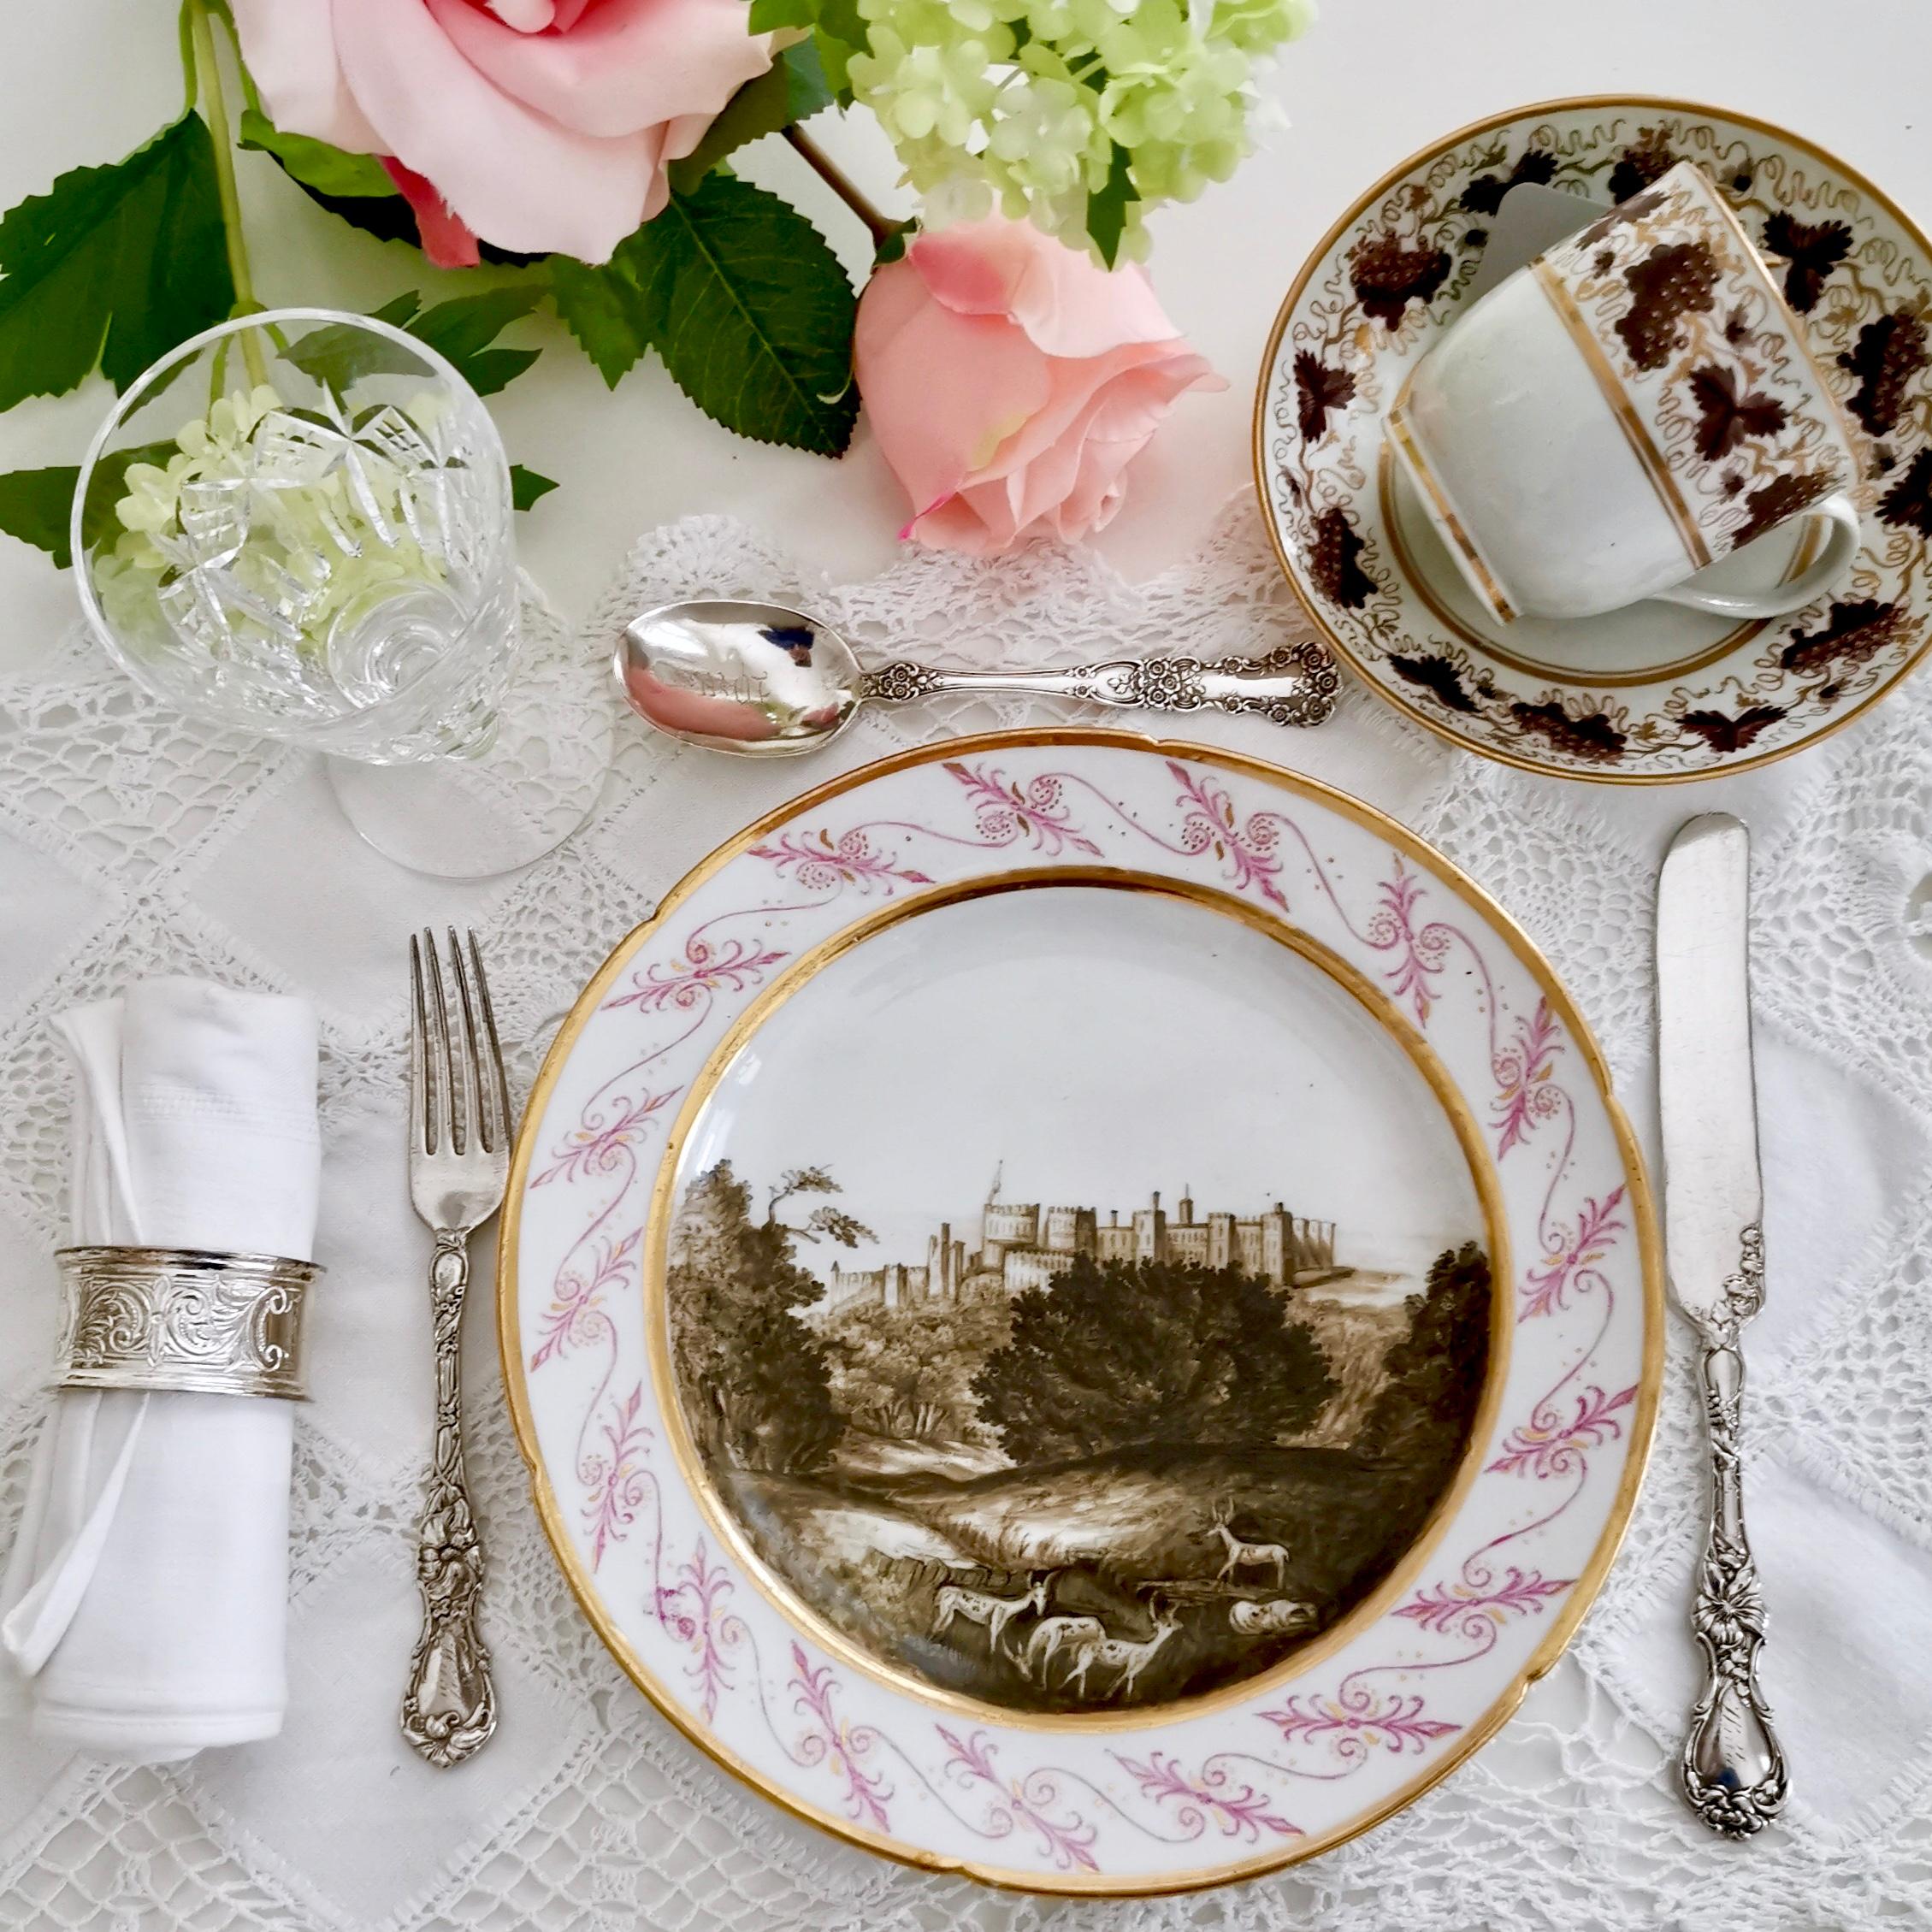 This is a beautiful and very rare dessert plate made by Coalport in circa 1805, which was the late Georgian era. The plate is decorated with a superbly painted named landscape of Windsor Castle in sepia by the famous porcelain painter Thomas